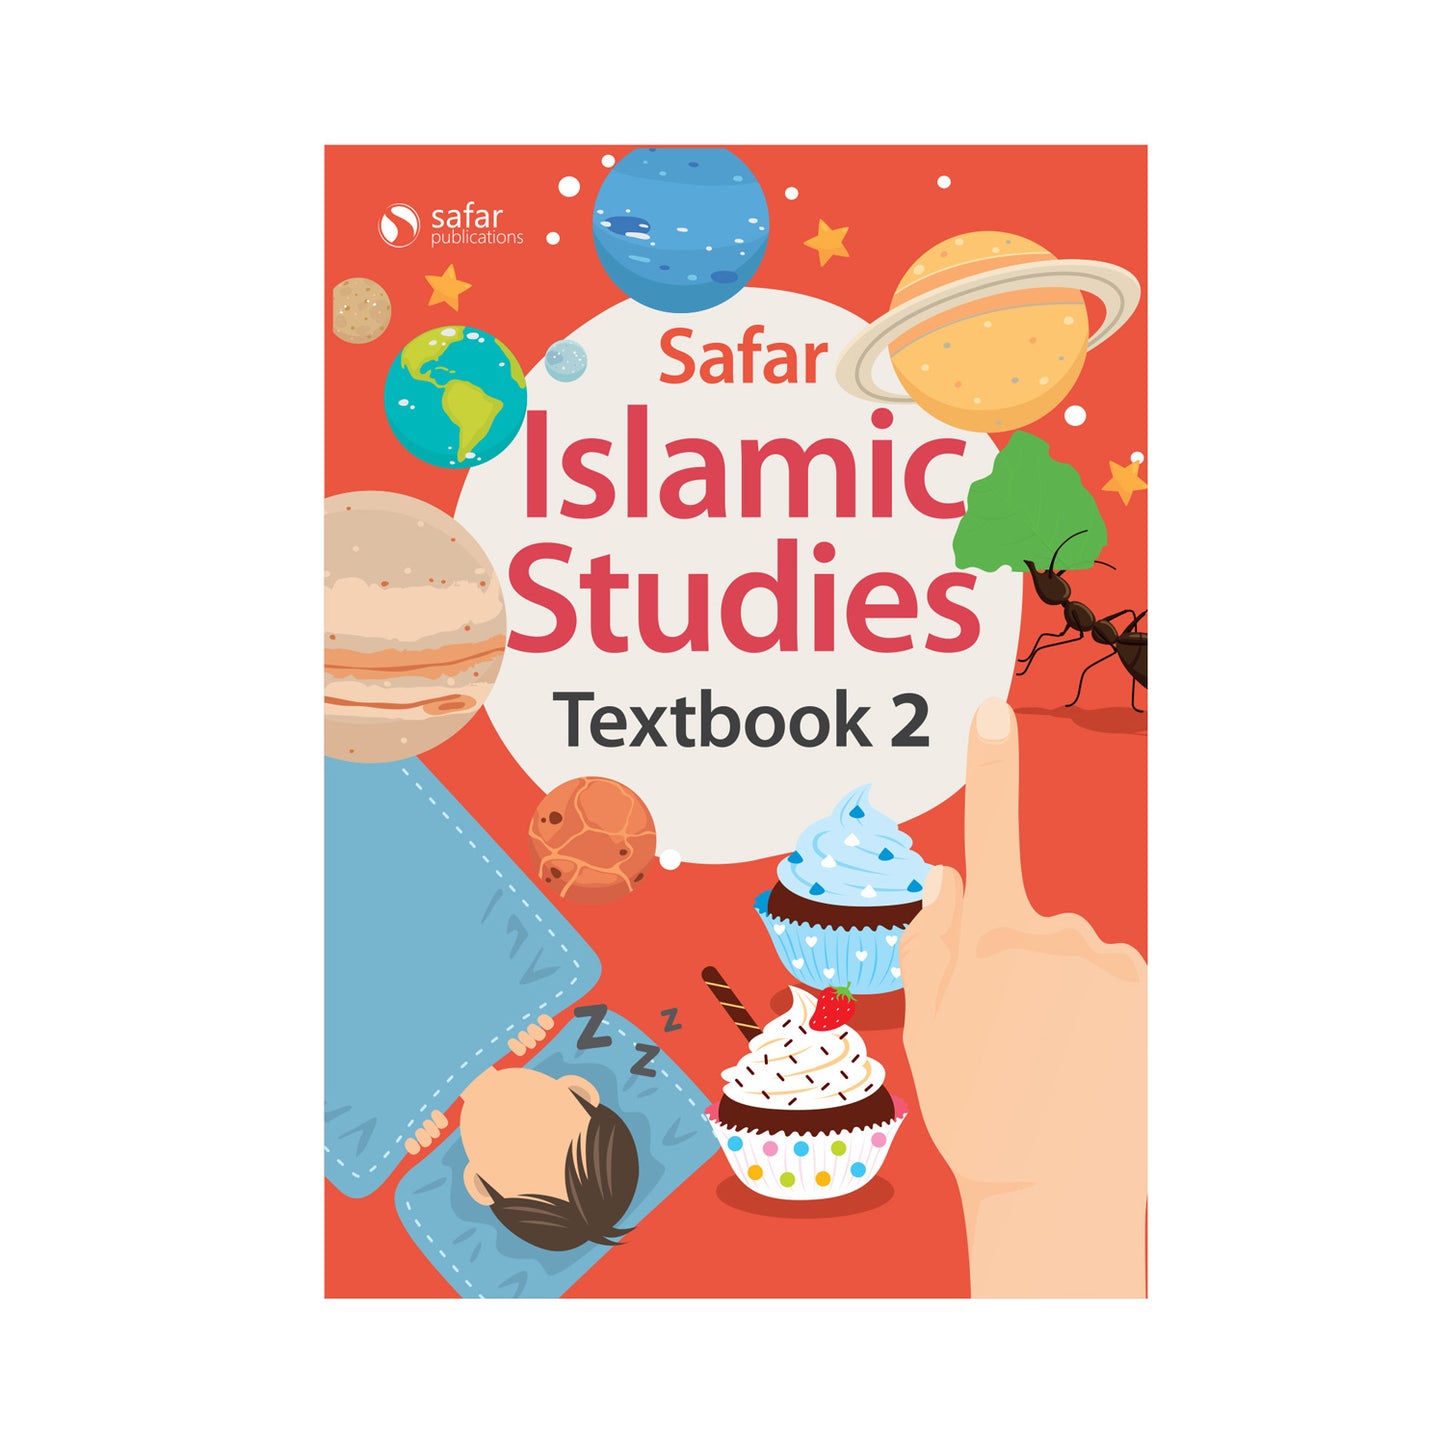 Islamic Studies: Textbook 2 – Learn about Islam Series by Safar